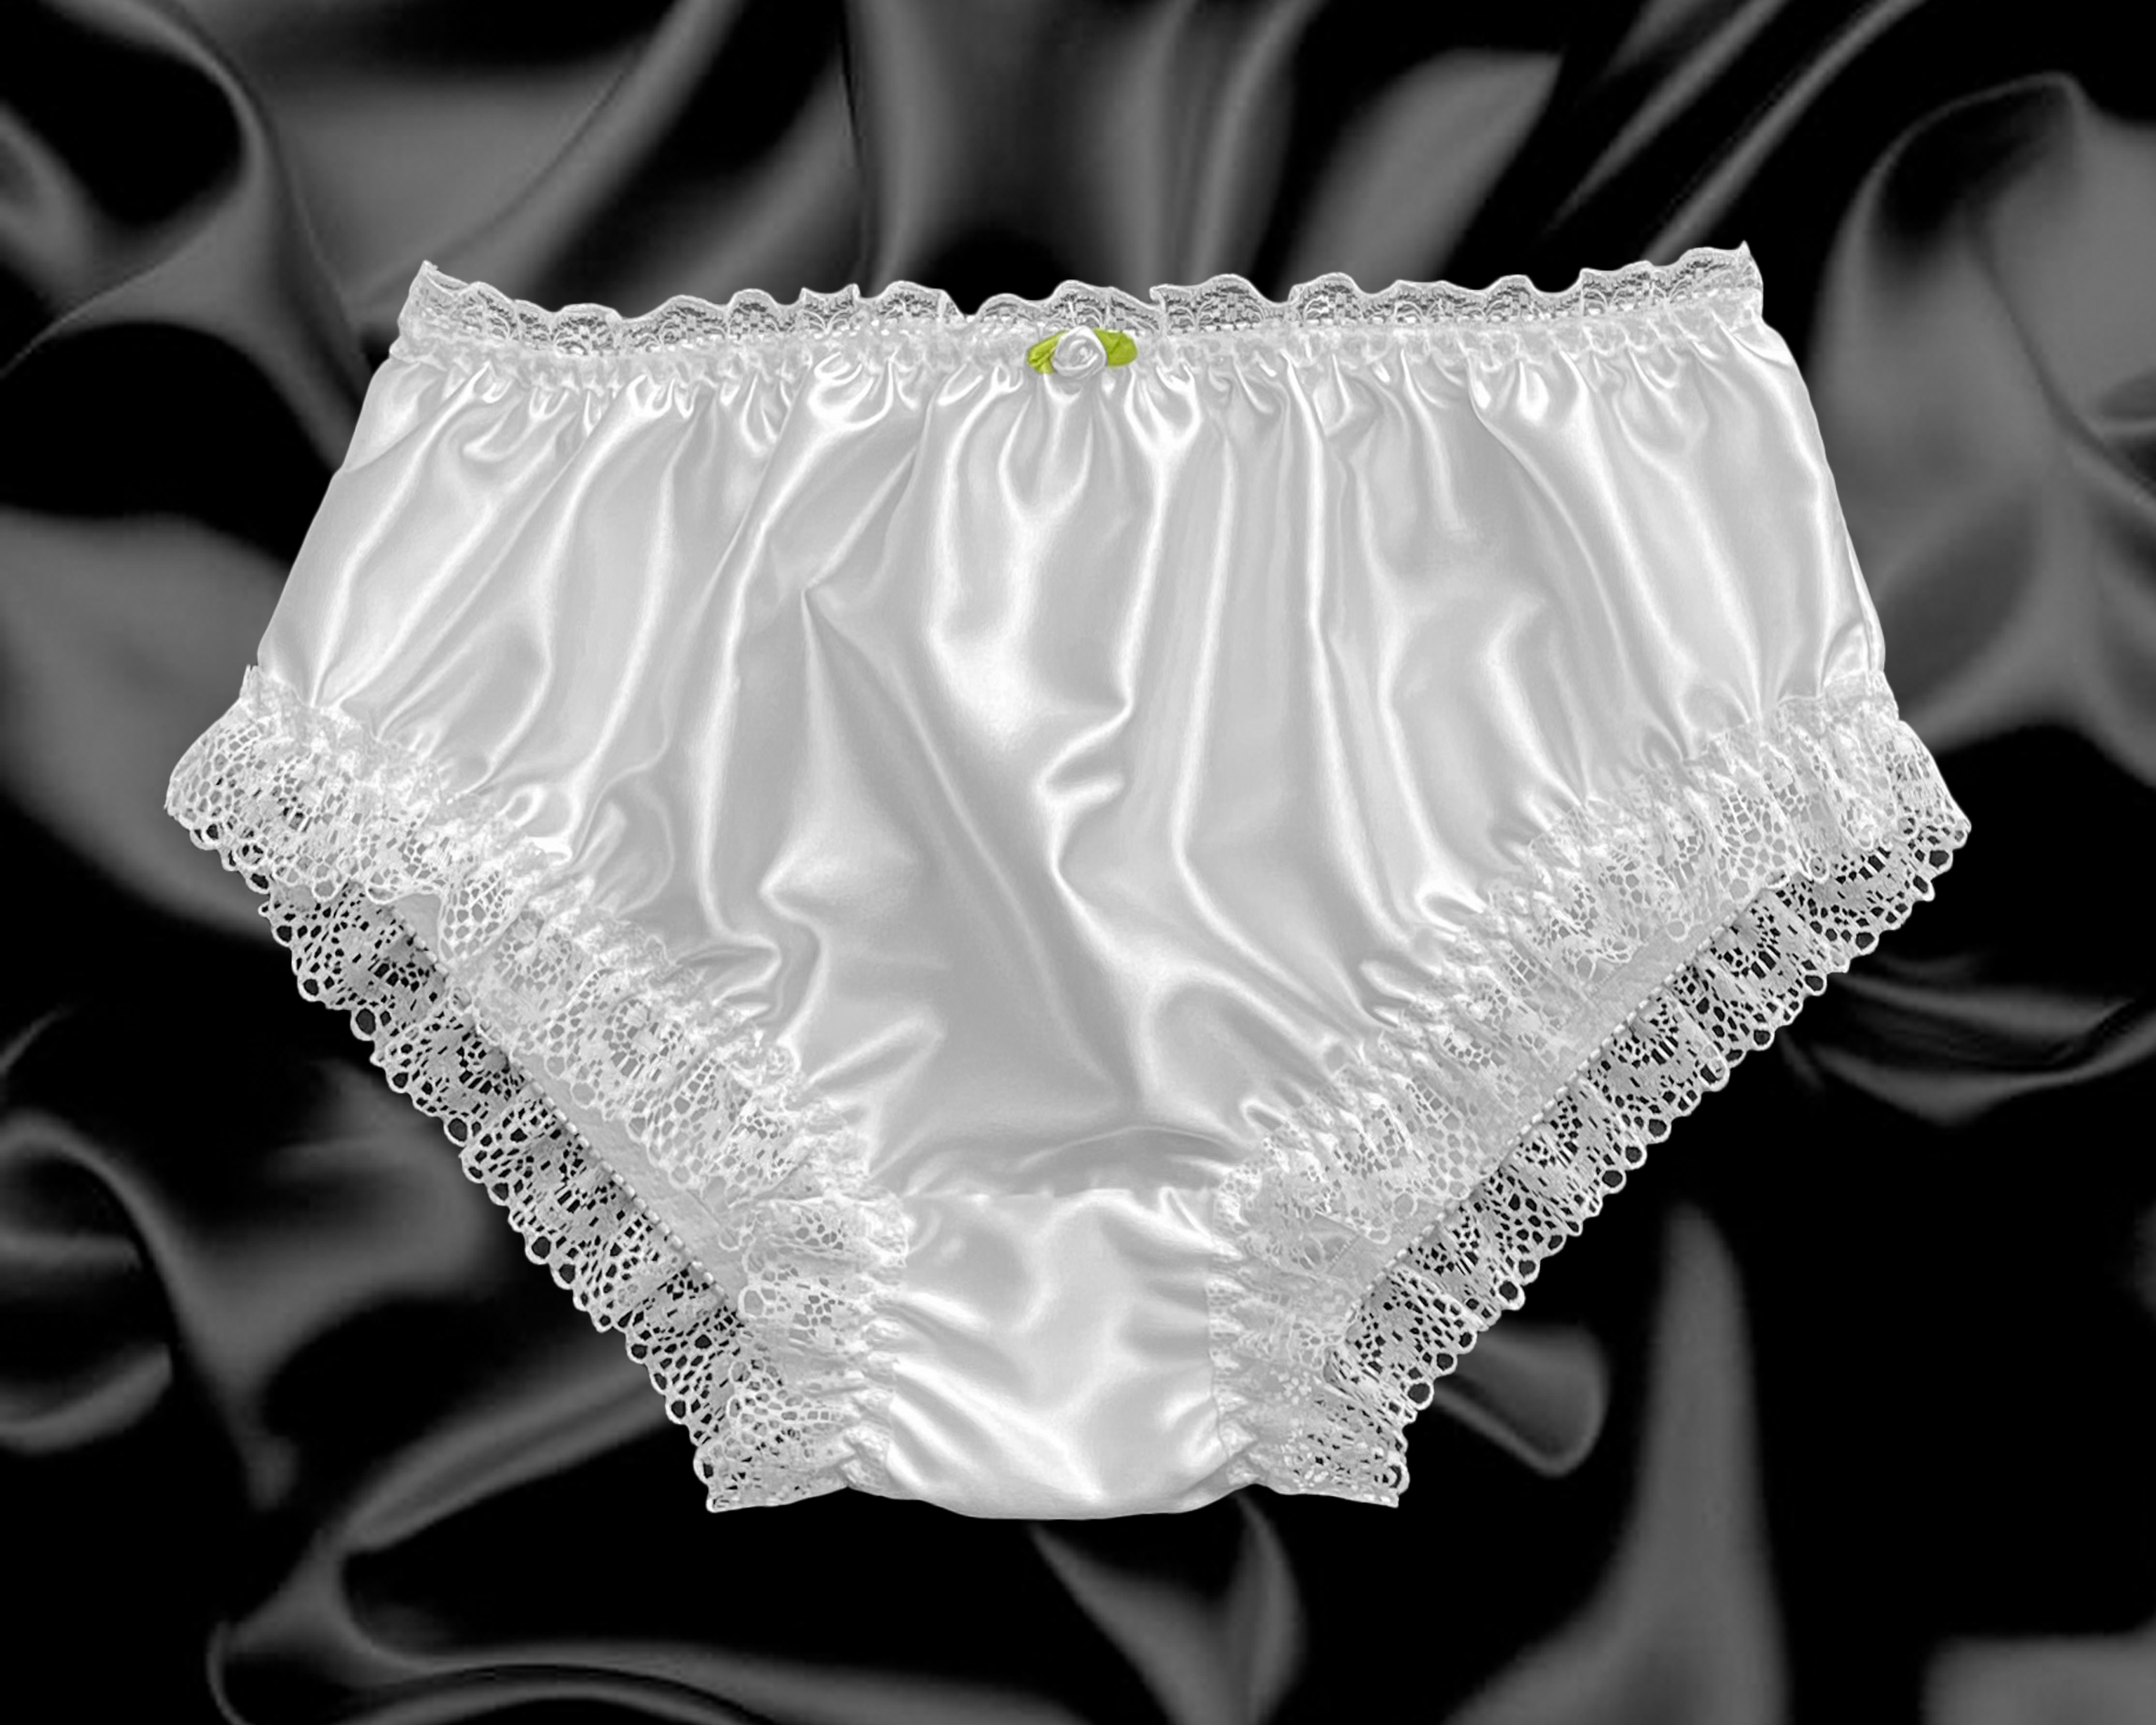 Tie Side Satin Knickers White Ivory Gothic Burlesque Panties